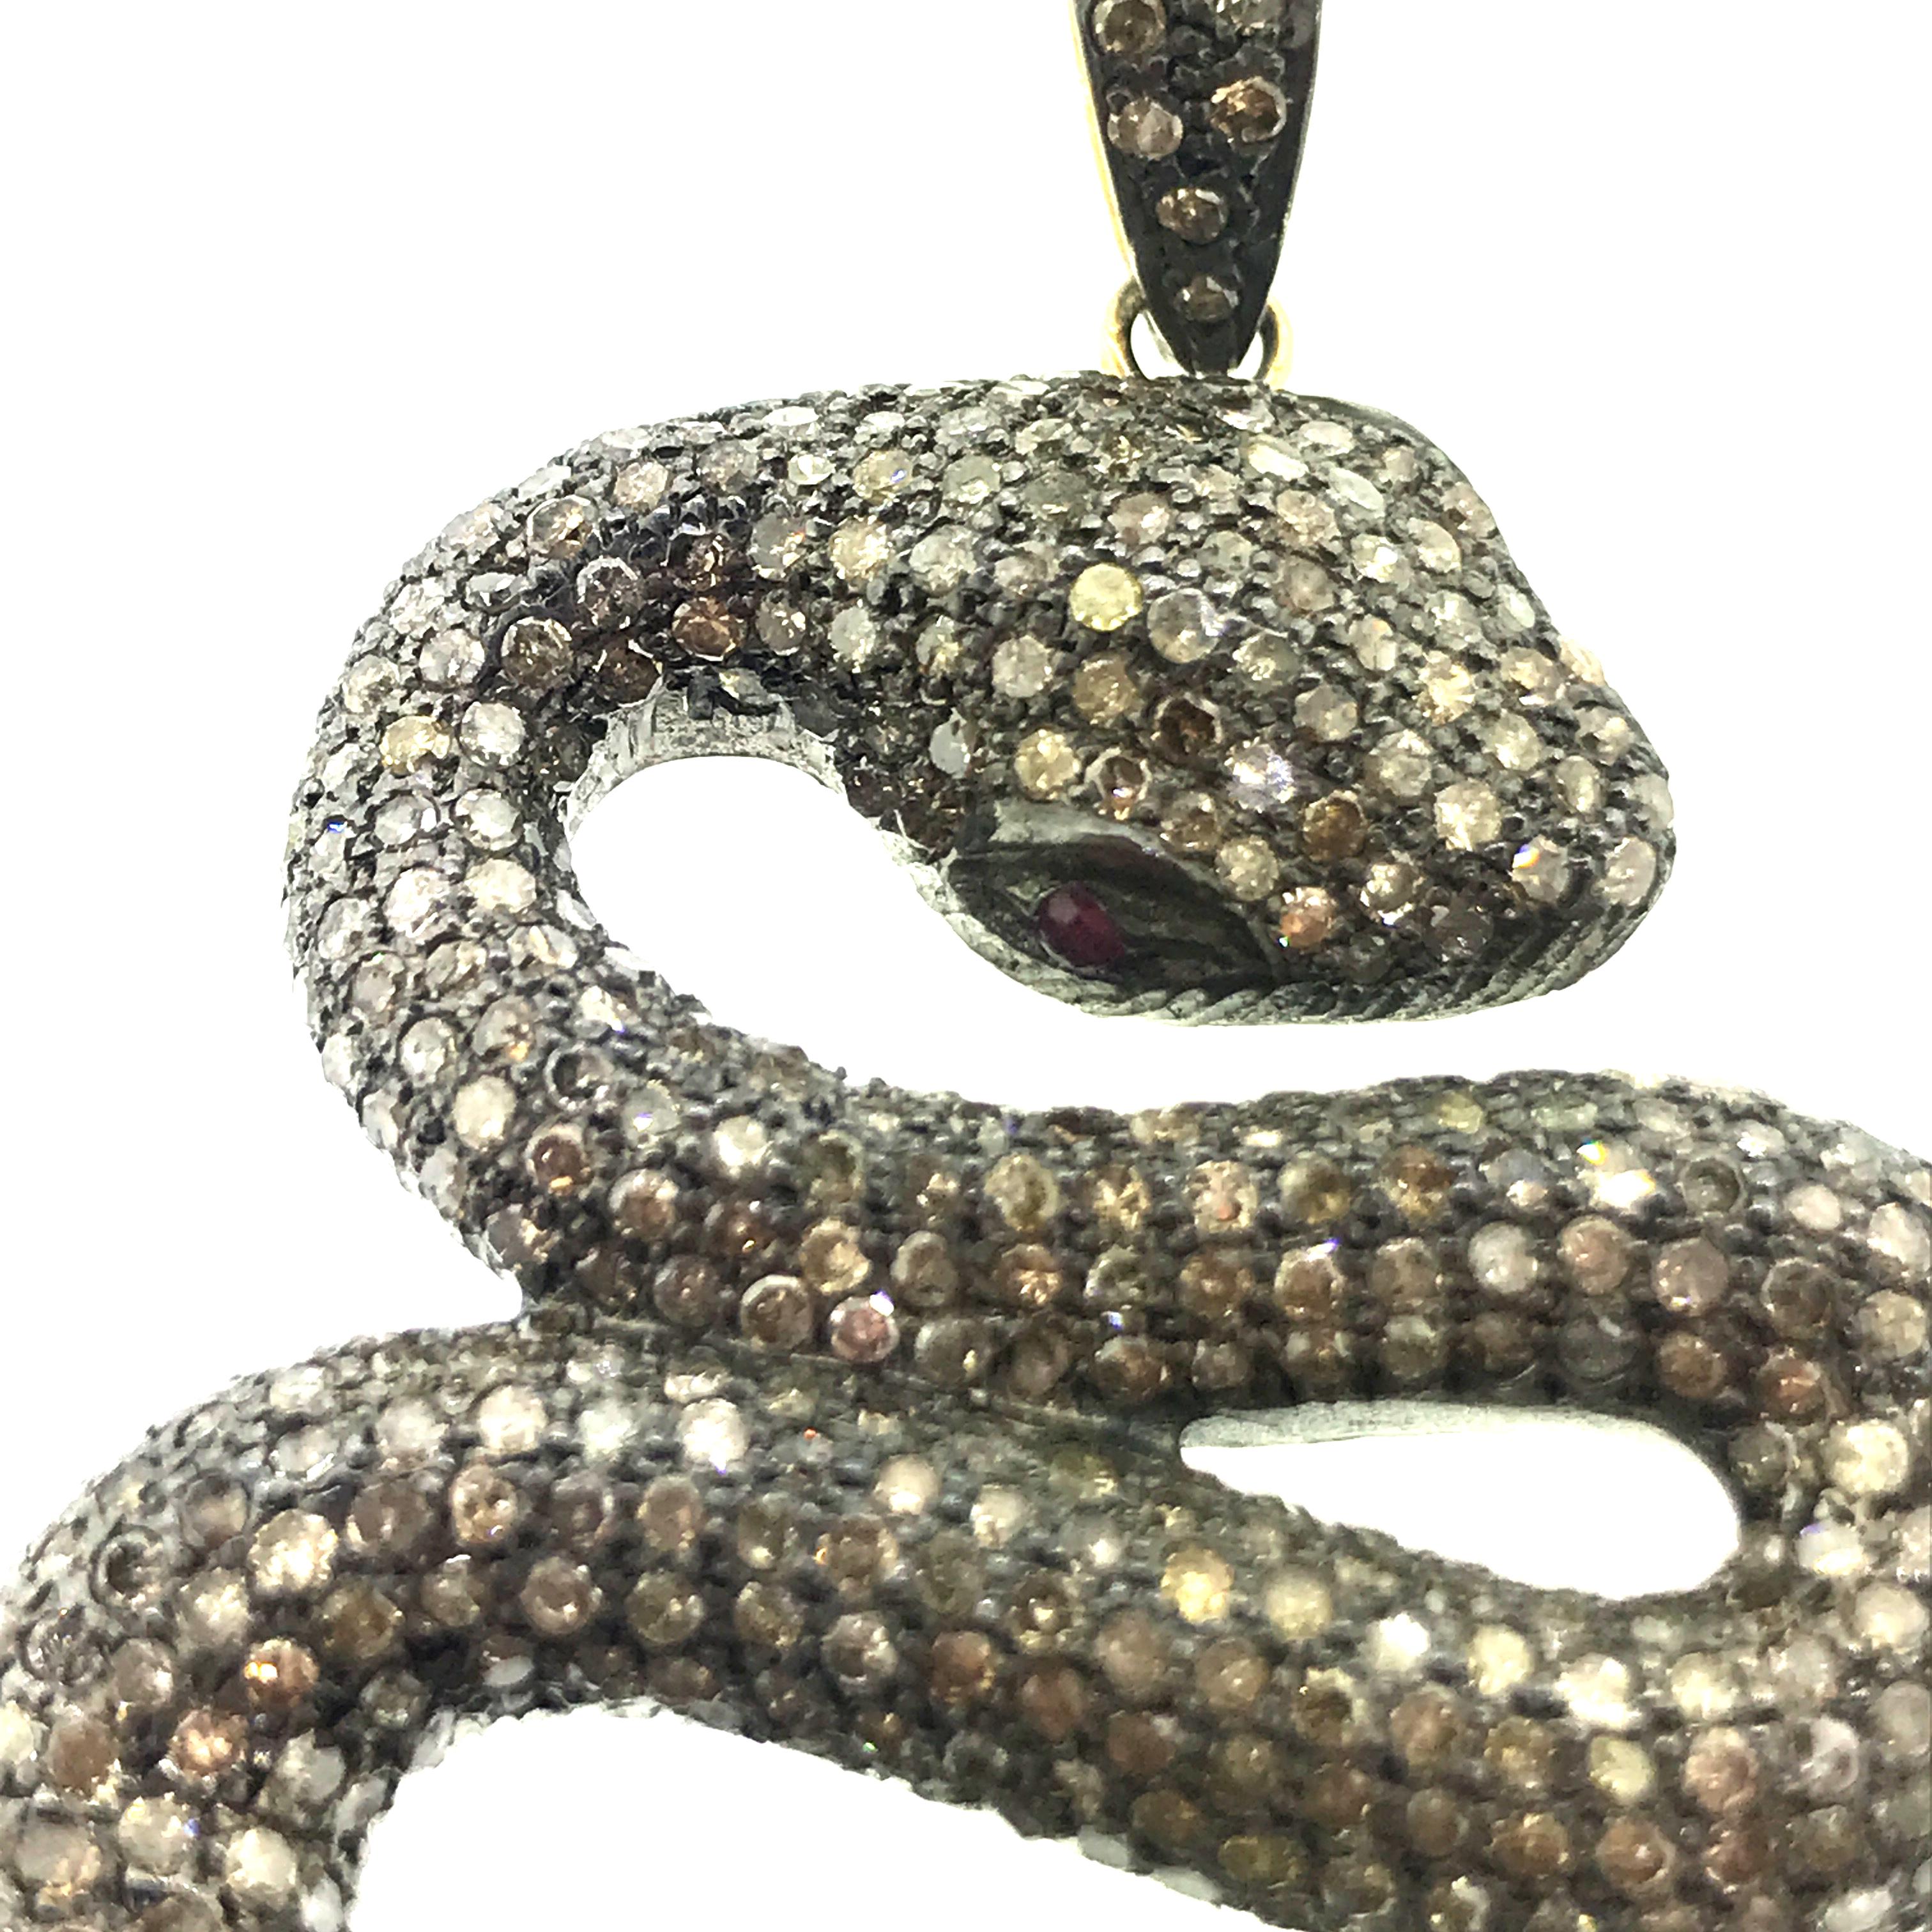 9.93 ct of Pave Champagne Diamonds with 0.08 ct of Ruby Eyes Snake set in Oxidized Sterling Silver with Back of bail in 14KT Gold. The snake 3.5 Inch Long along with the bail (bail is attached to the snake body with a 14KT Gold jump ring). 
Stones :